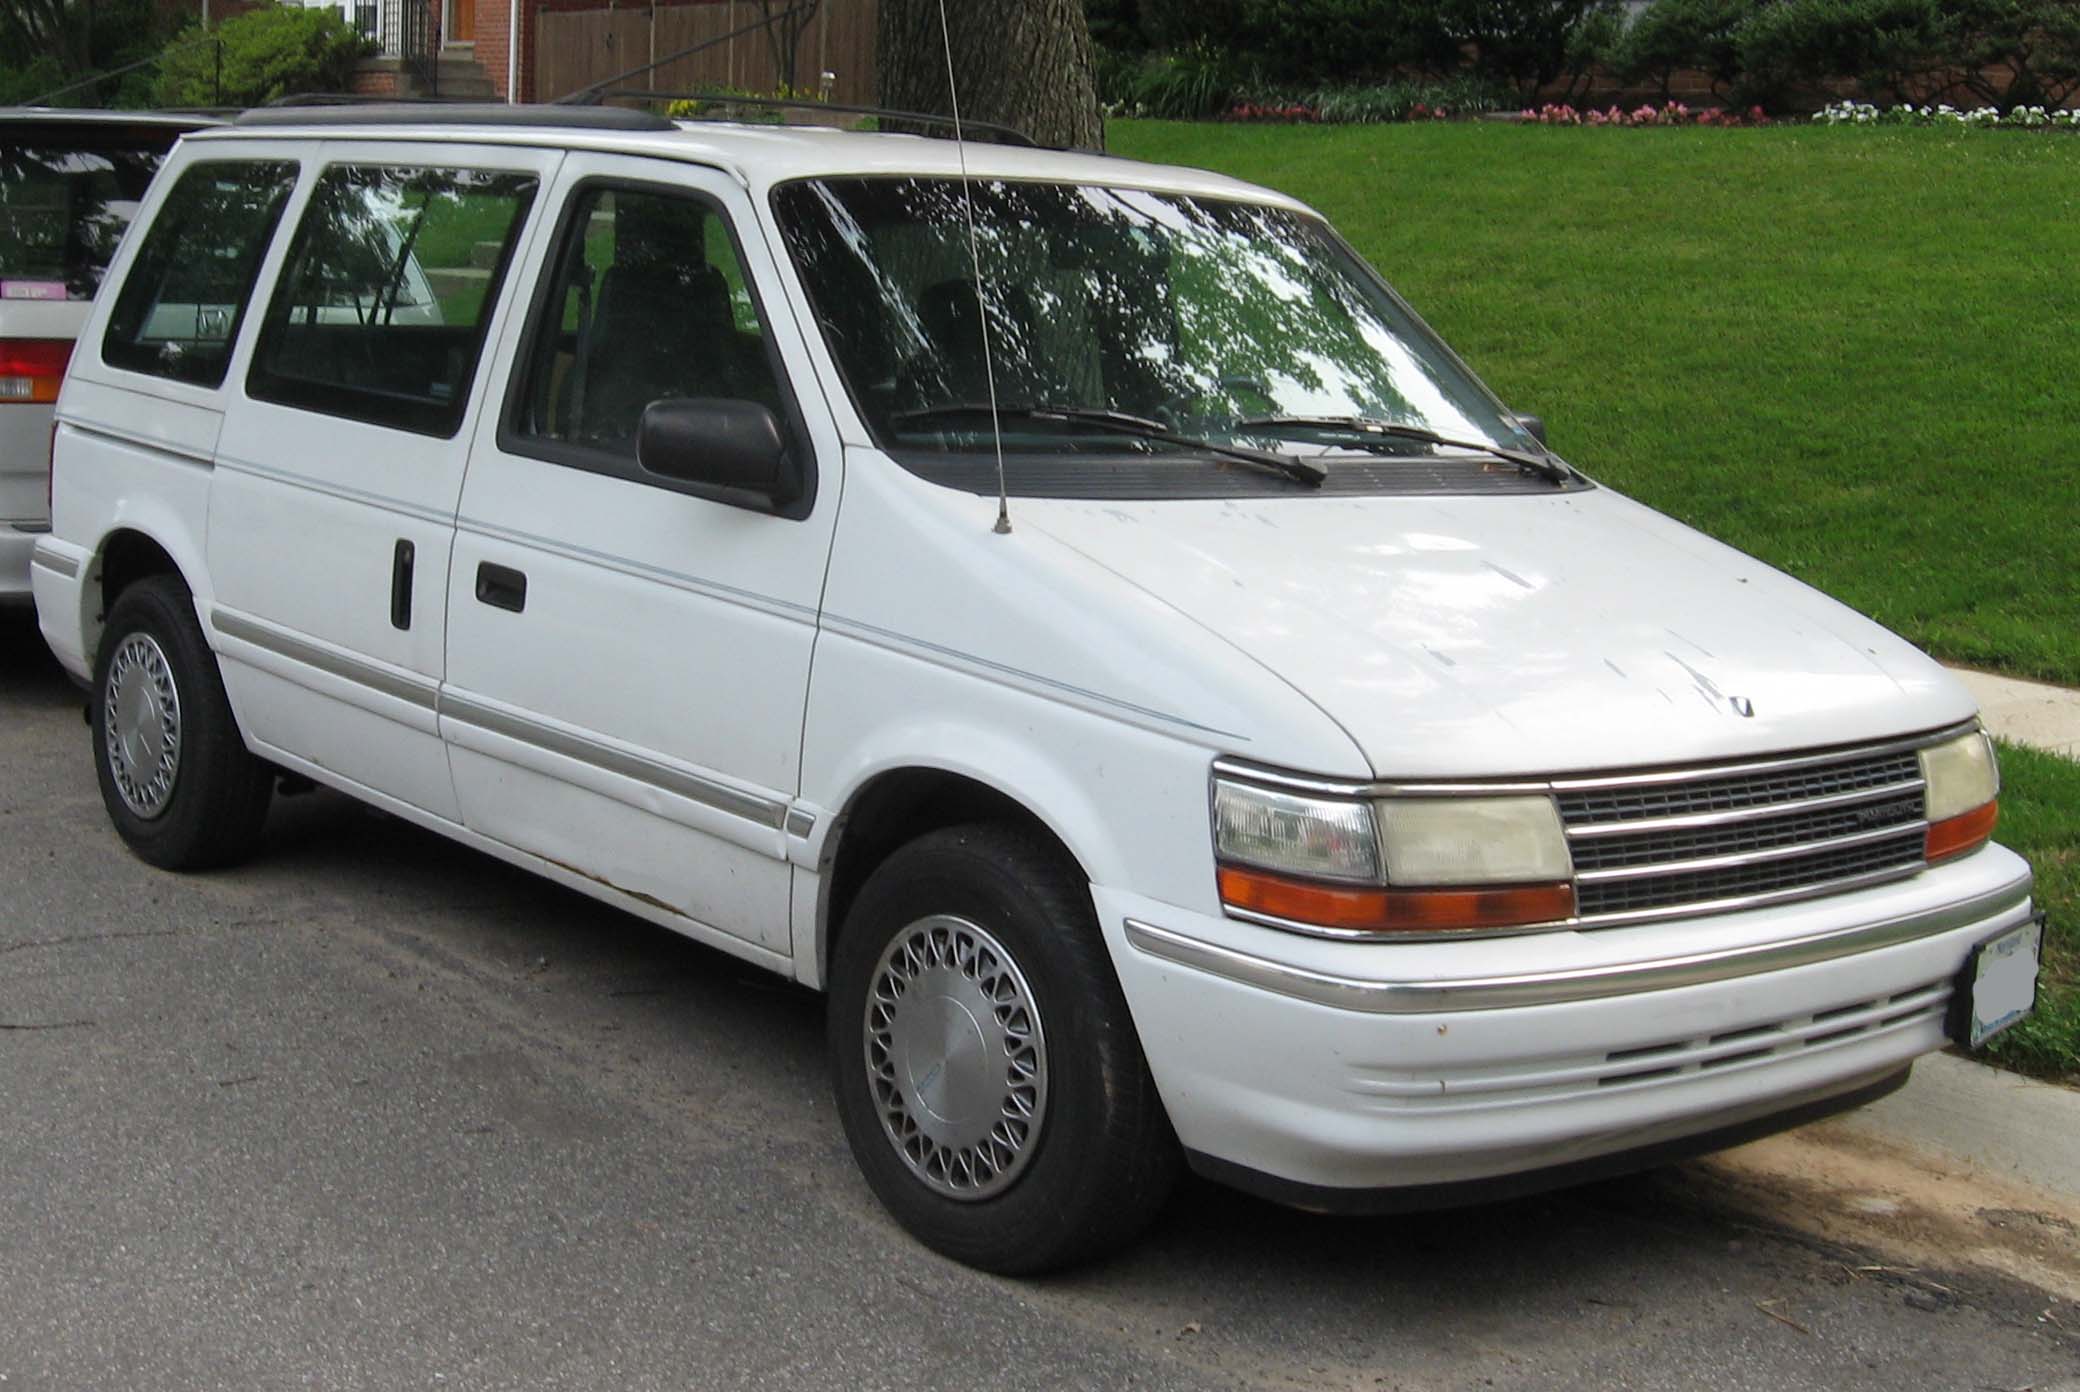 Plymouth voyager 1994 photo - 2